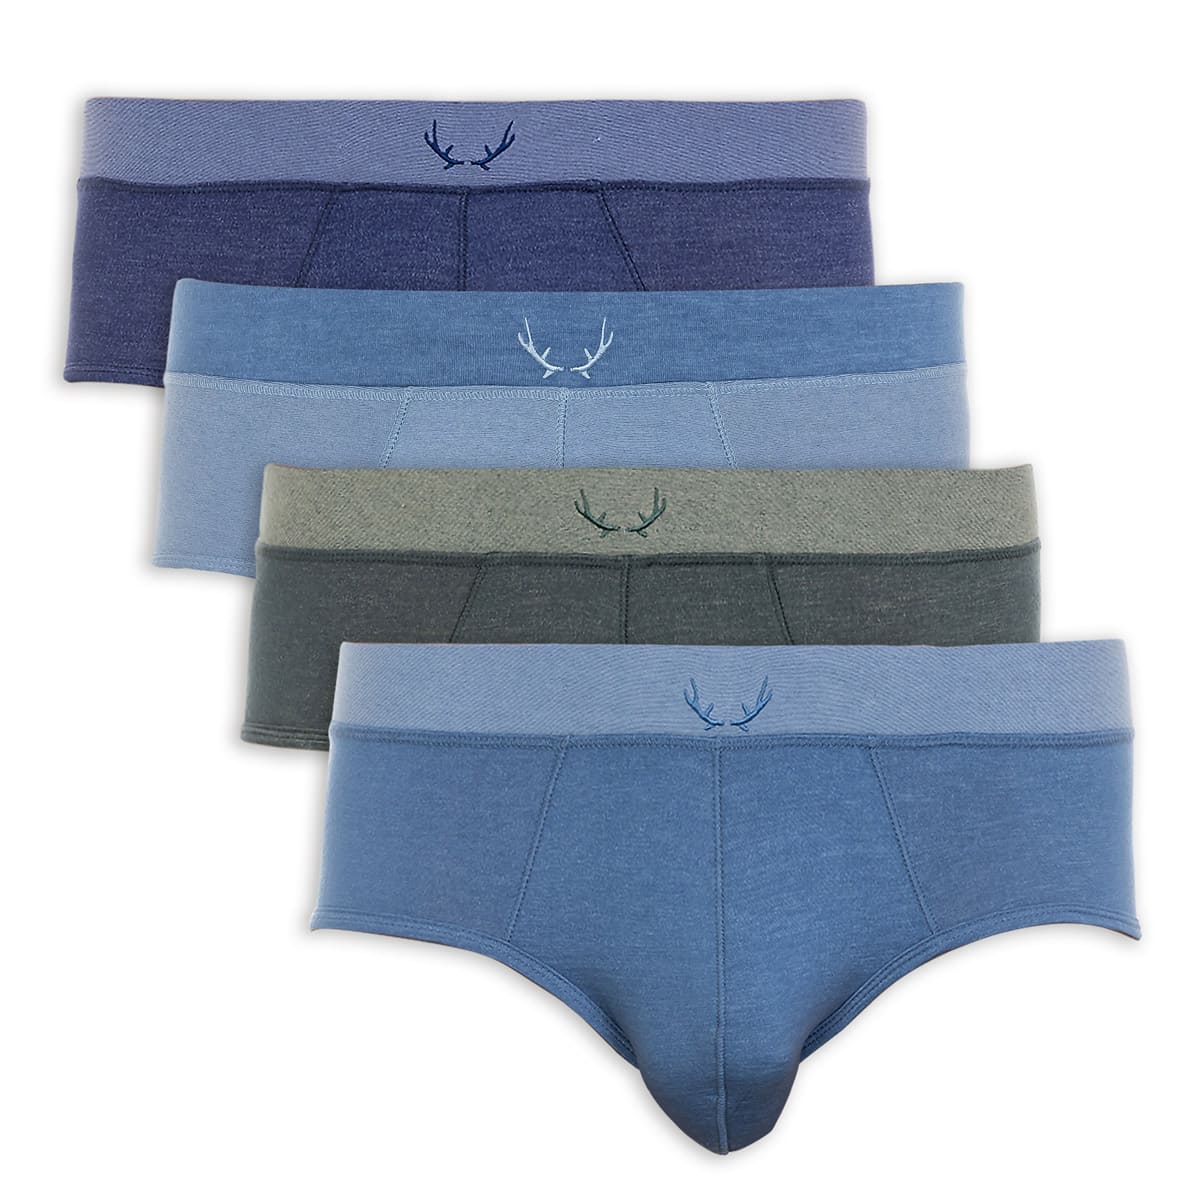 4-pack of underpants made from Tencel by Bluebuck